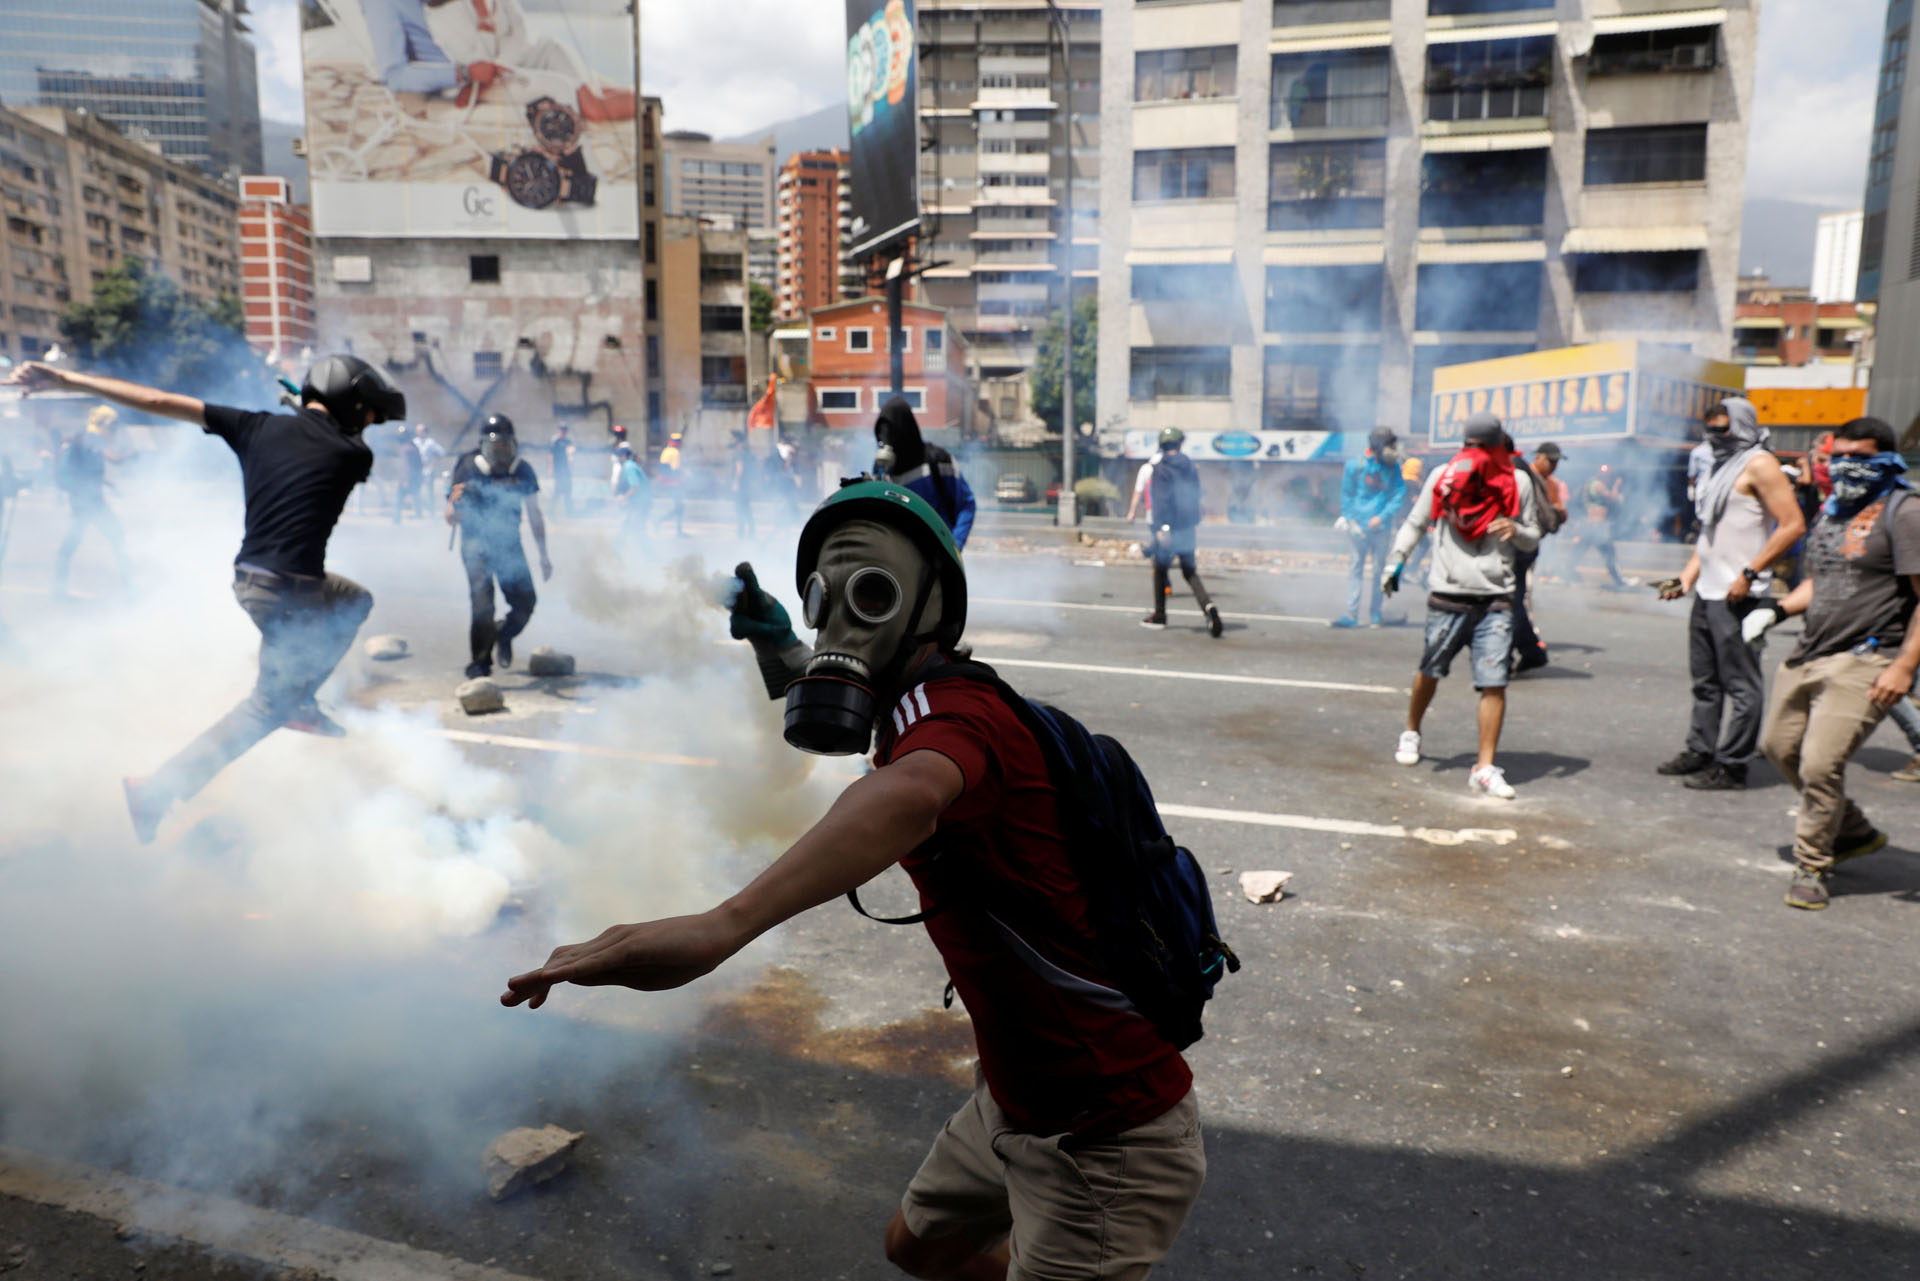 A demonstrator throws a tear gas canister back to policemen during an opposition rally in Caracas, Venezuela April 6, 2017. REUTERS/Carlos Garcia Rawlins